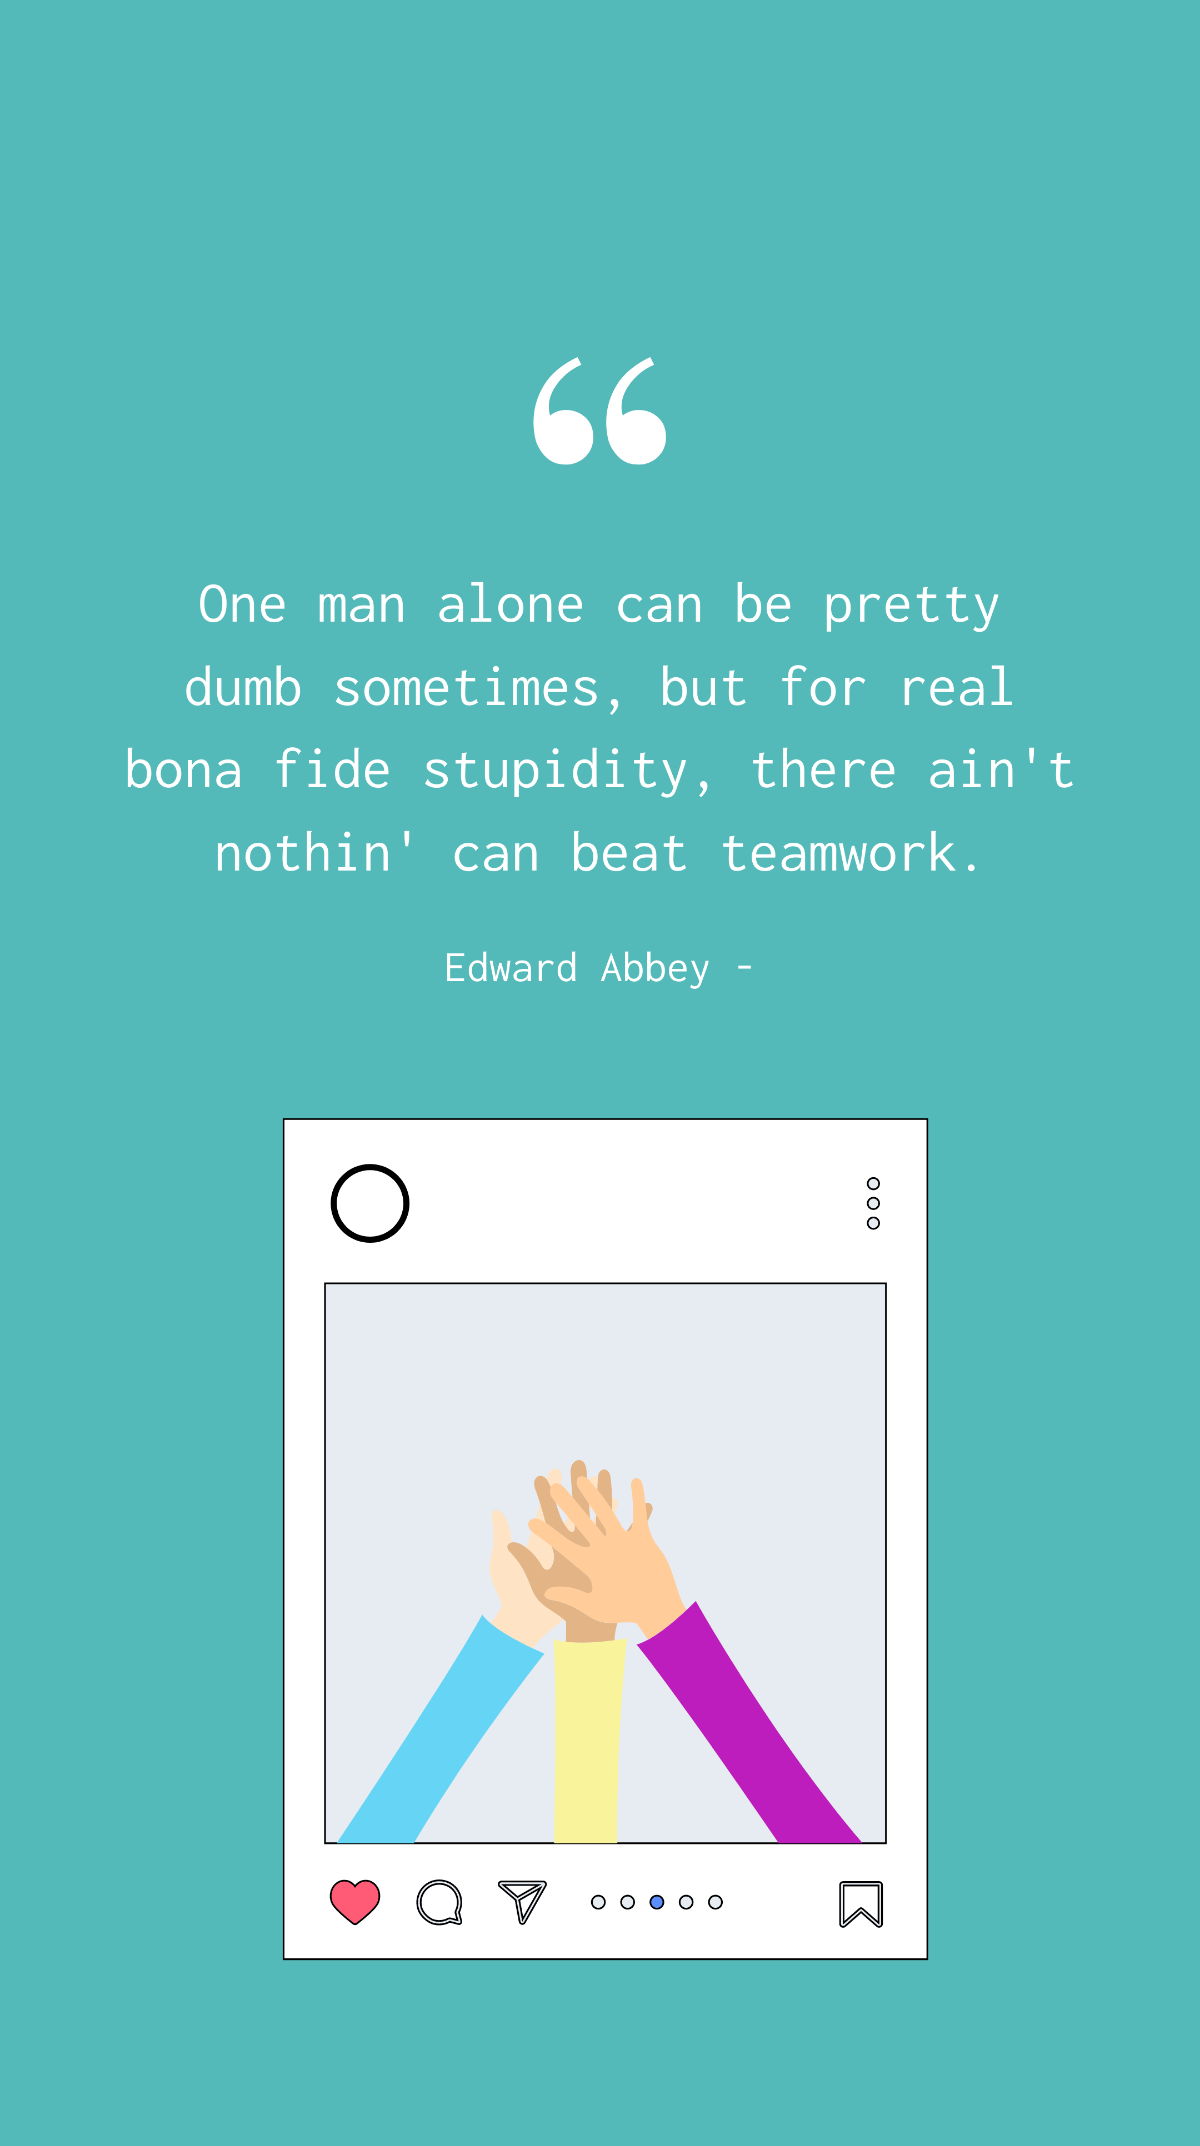 Edward Abbey - One man alone can be pretty dumb sometimes, but for real bona fide stupidity, there ain't nothin' can beat teamwork. Template